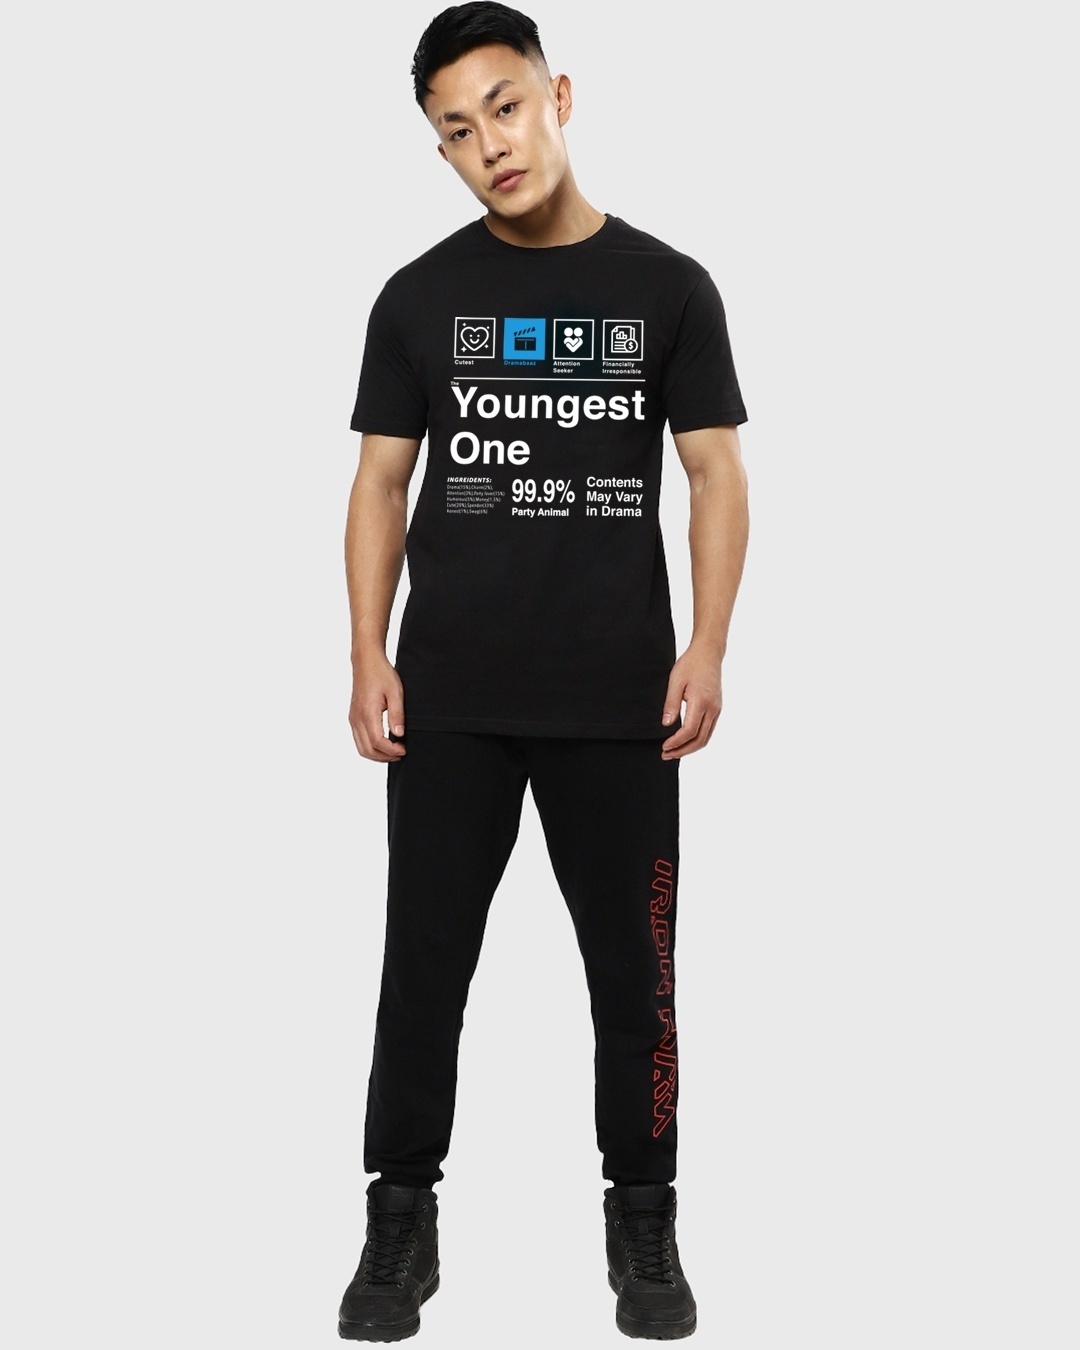 Shop Men's Black The Youngest One Typography T-shirt-Design